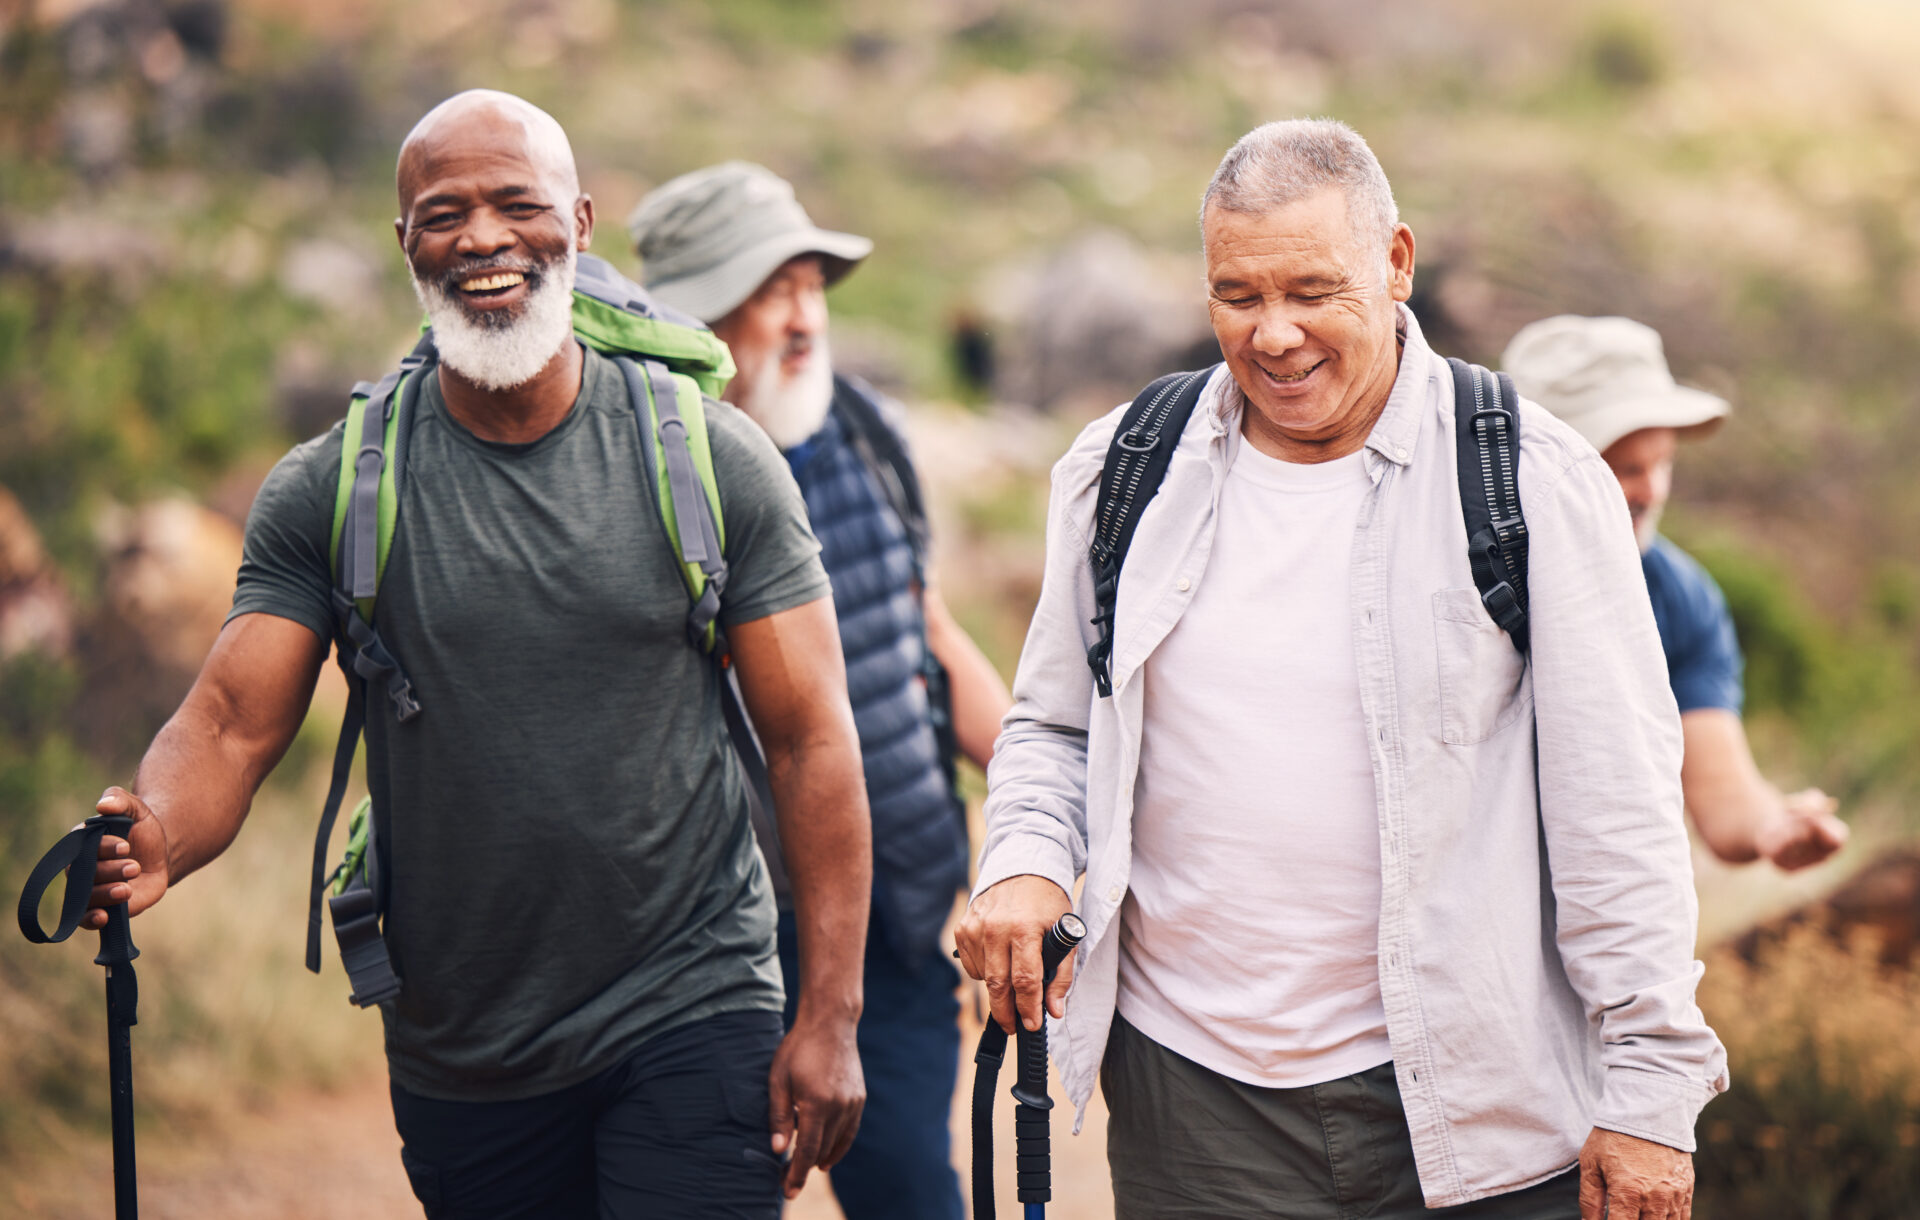 Friend group of elderly men on hiking trail. Men have recovered from total hip replacement surgery